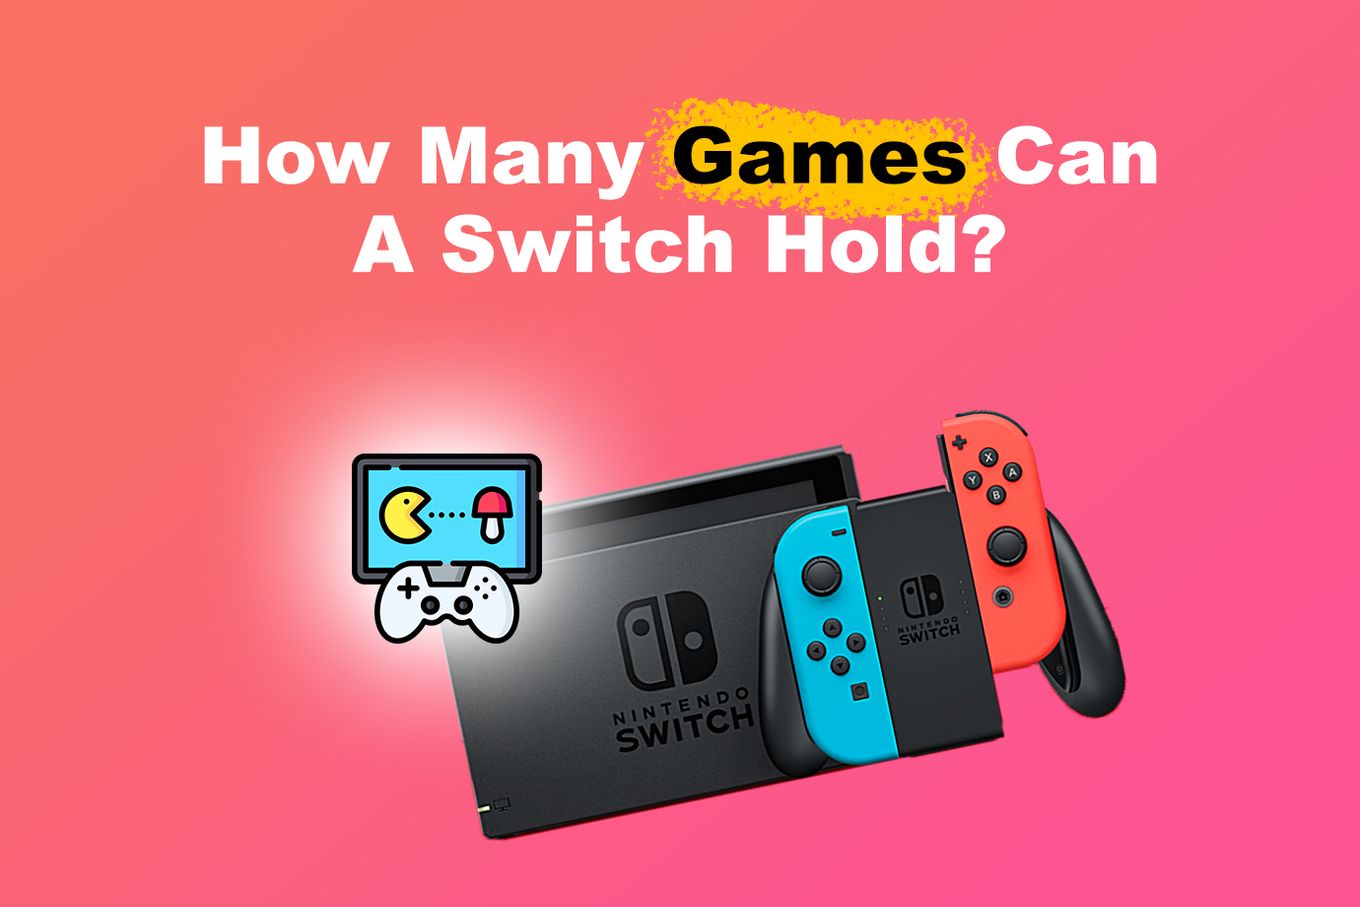 How Much Is a Nintendo Switch?